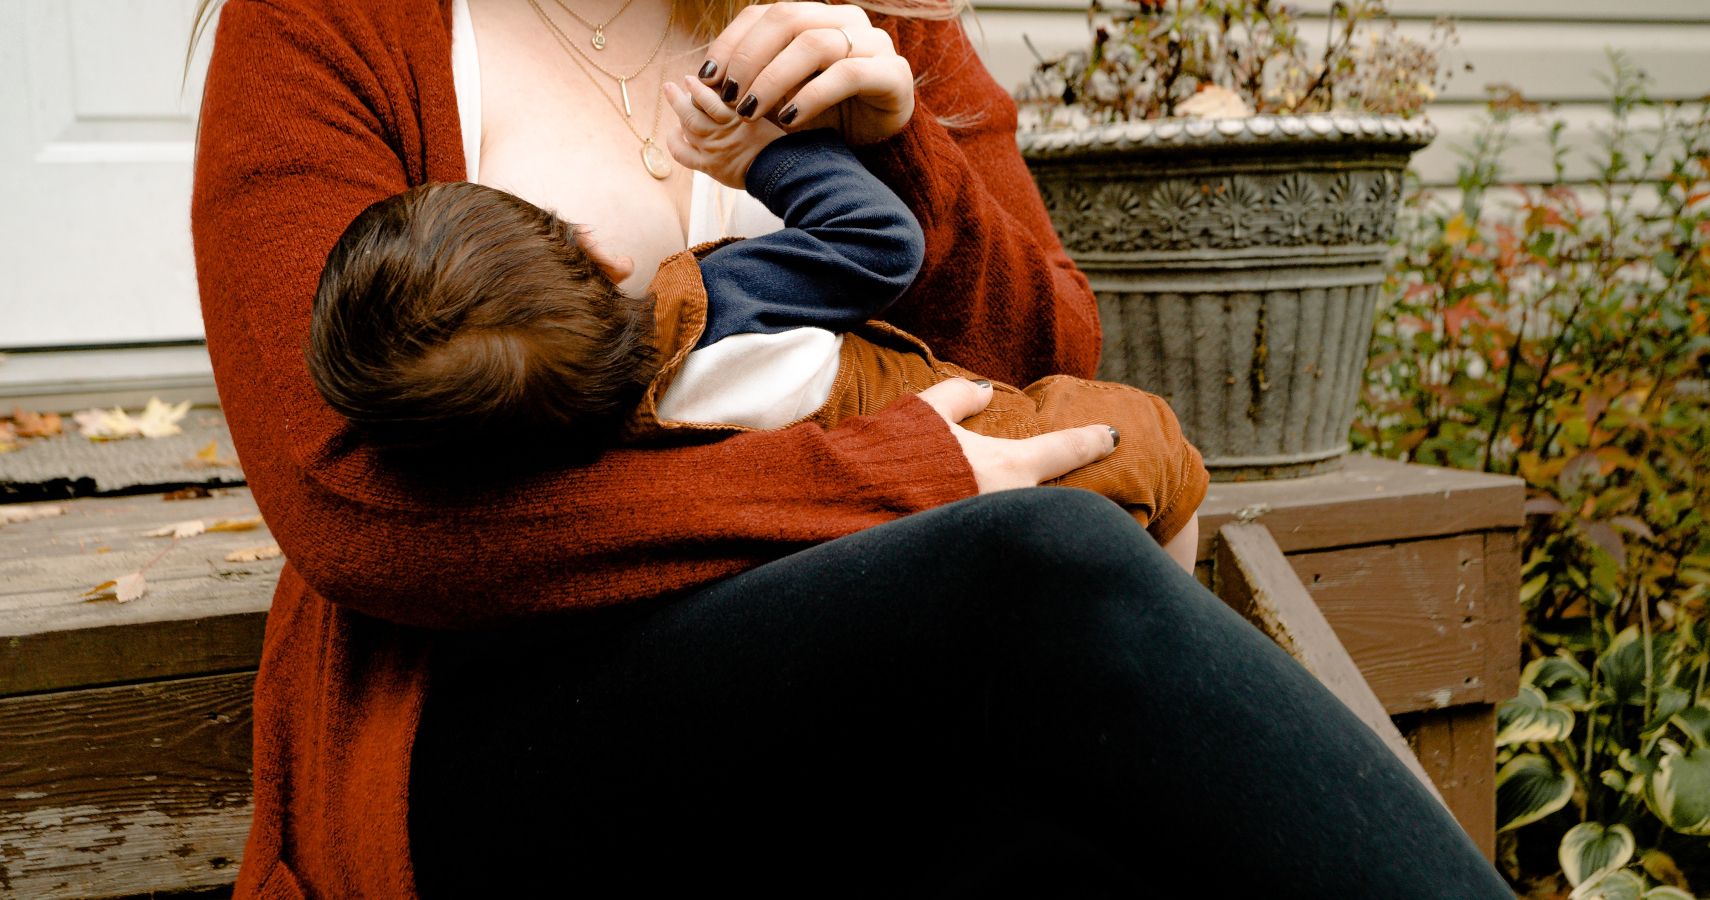 A mom breastfeeding her baby outside